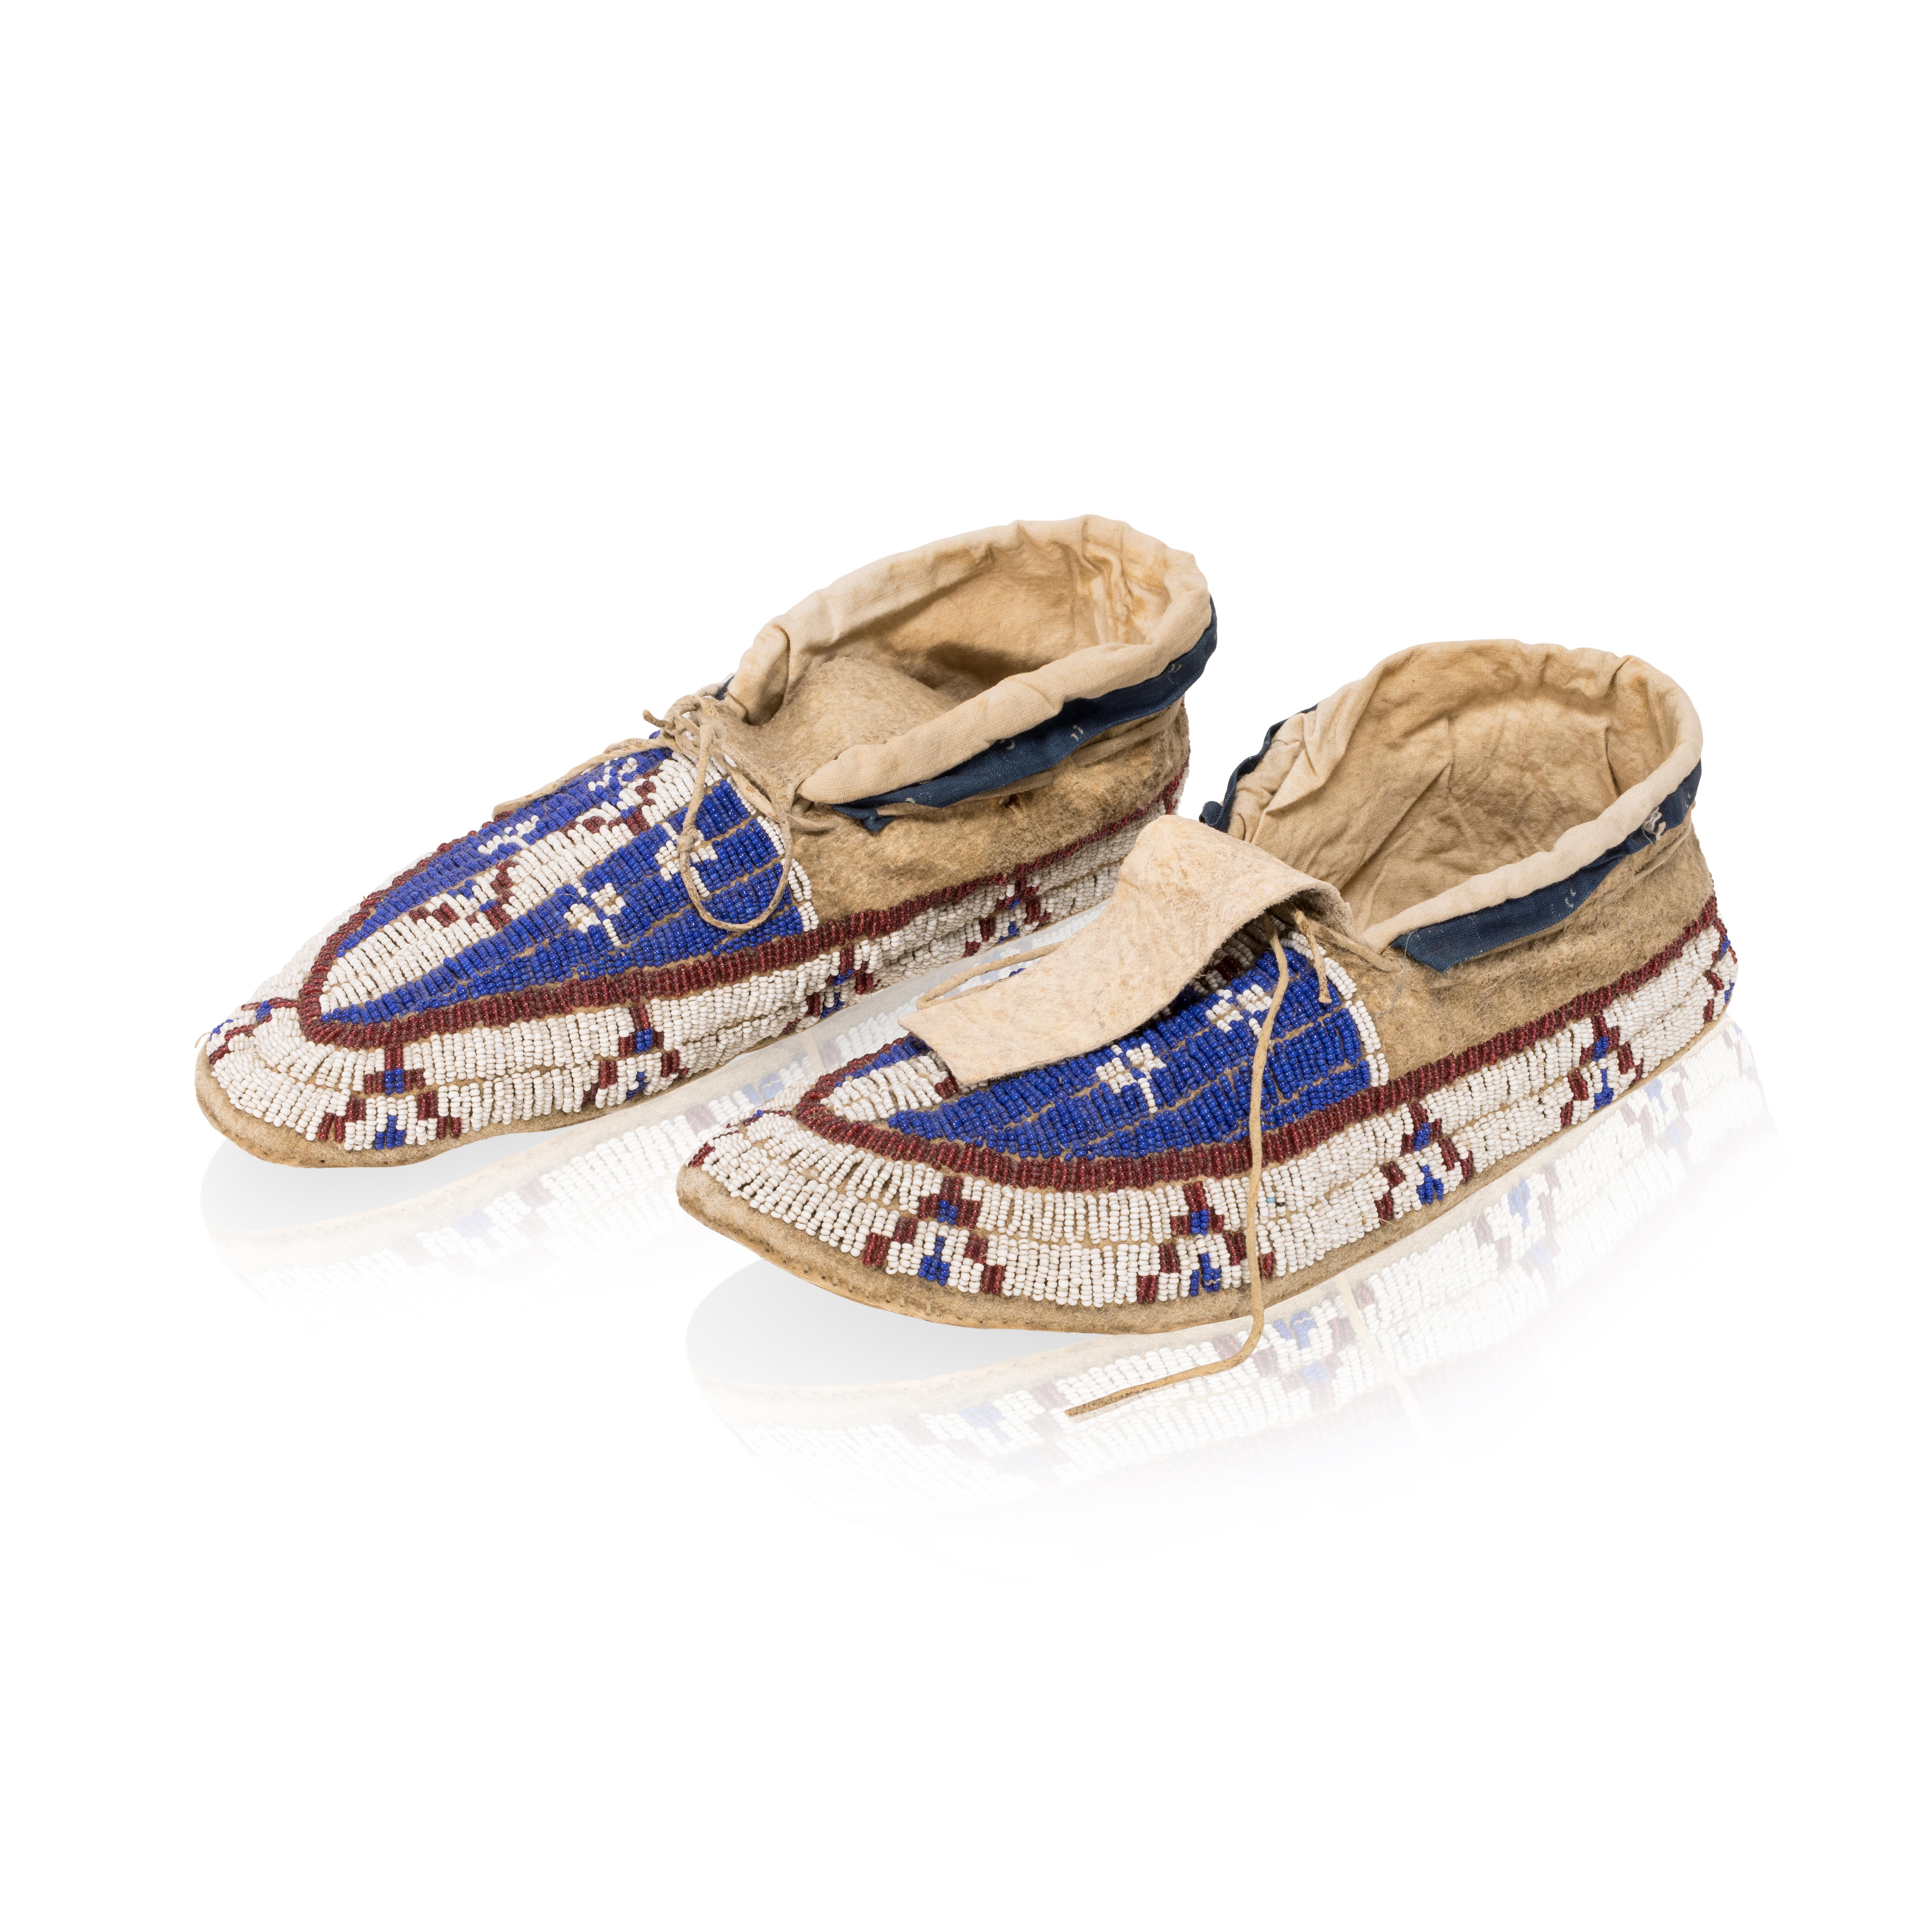 Sioux fully beaded moccasins. Red, white and blue with geometric stacked colors. Hard soles, cotton cuff edging.

Period: Late 19th Century
Origin: Great Plains - Sioux, Native American
Size: 10 1/2